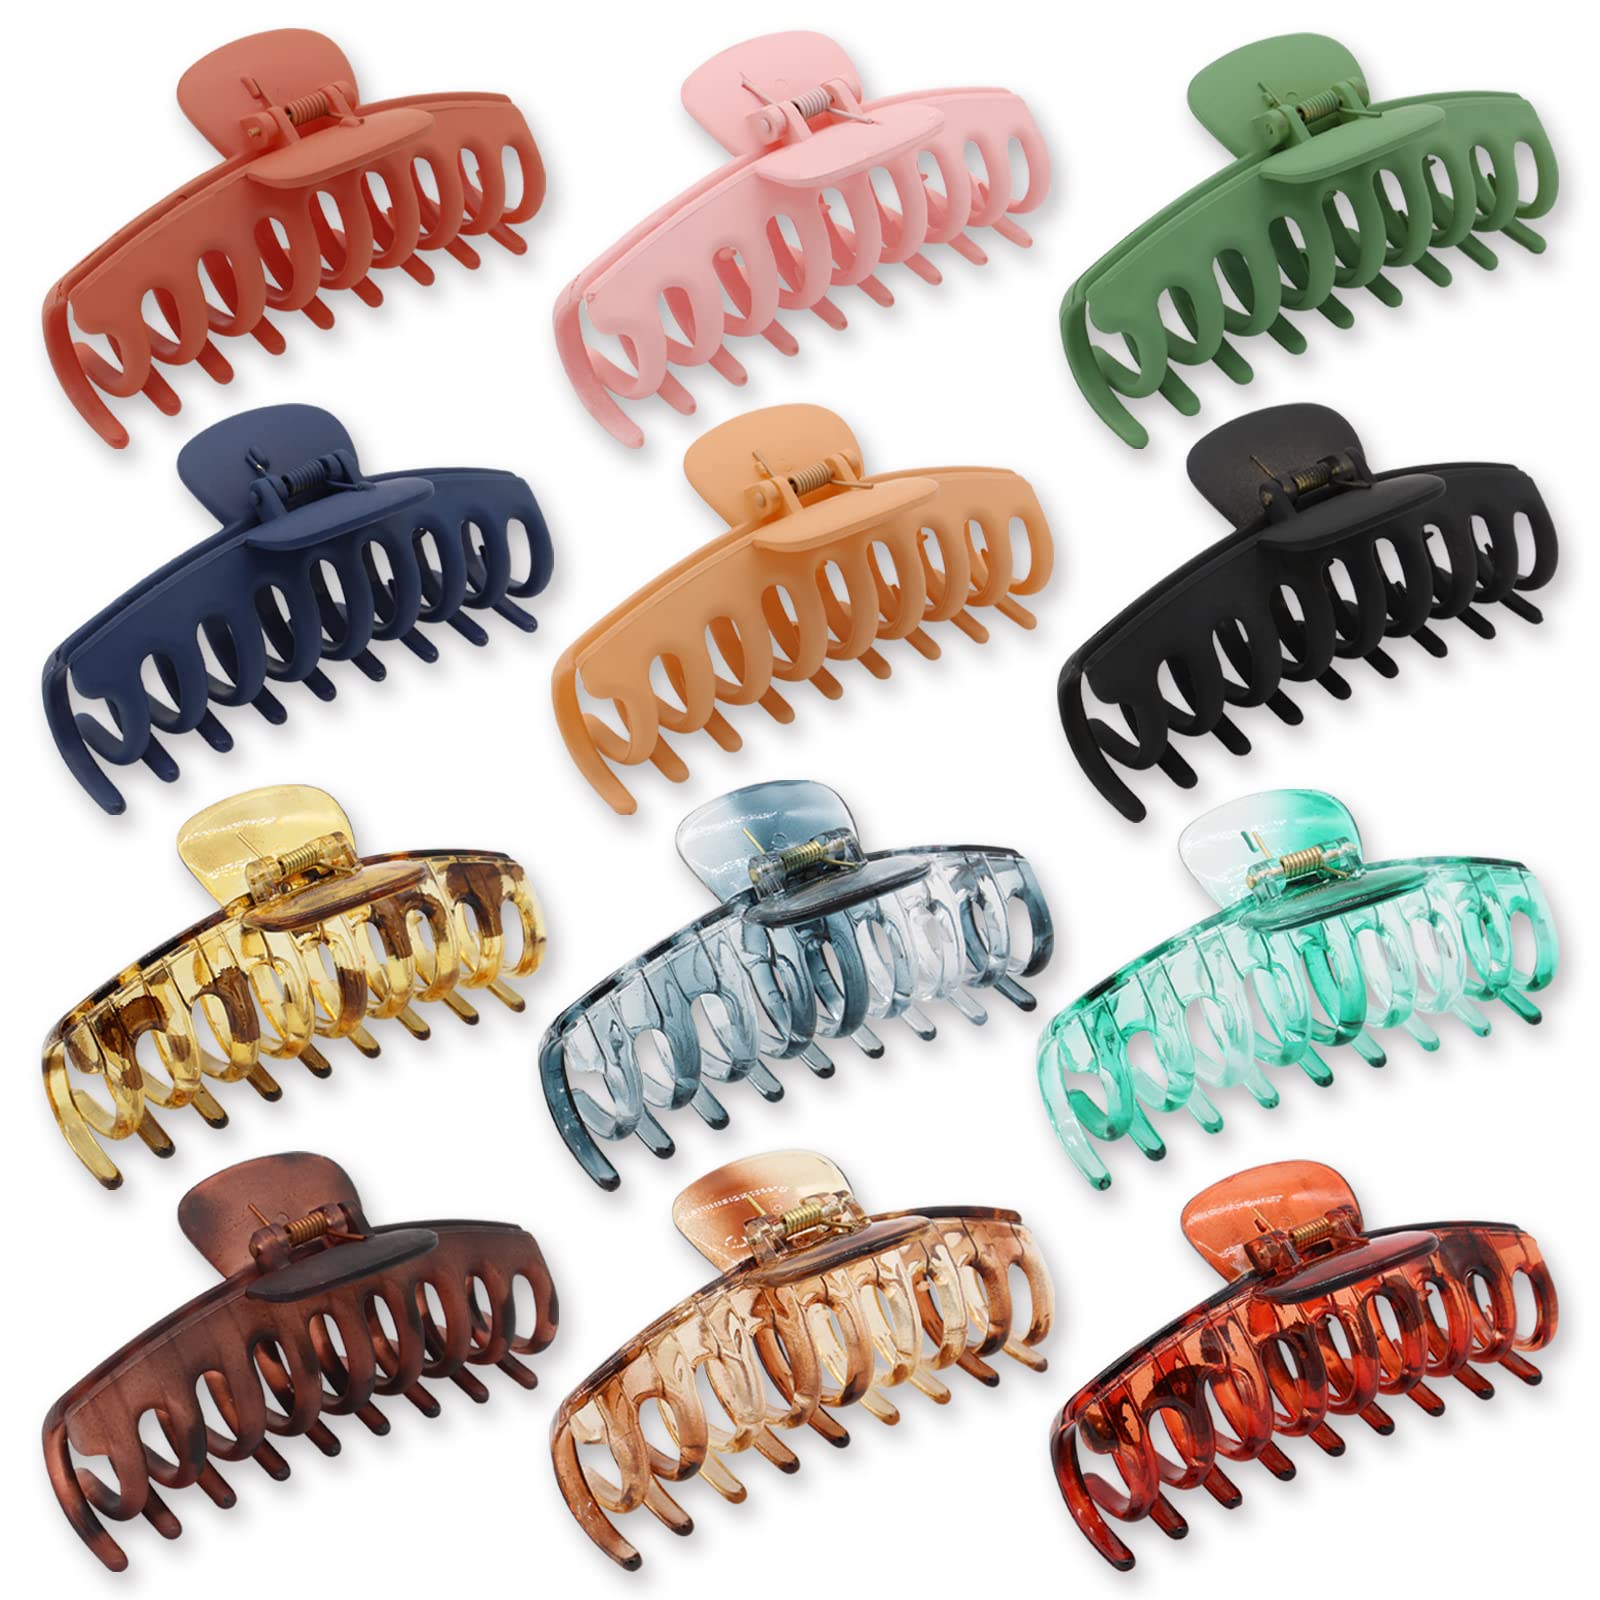 Hair Clips 4 Color Hair Jaw Clamp Clips Clips Strong Hold Nonslip